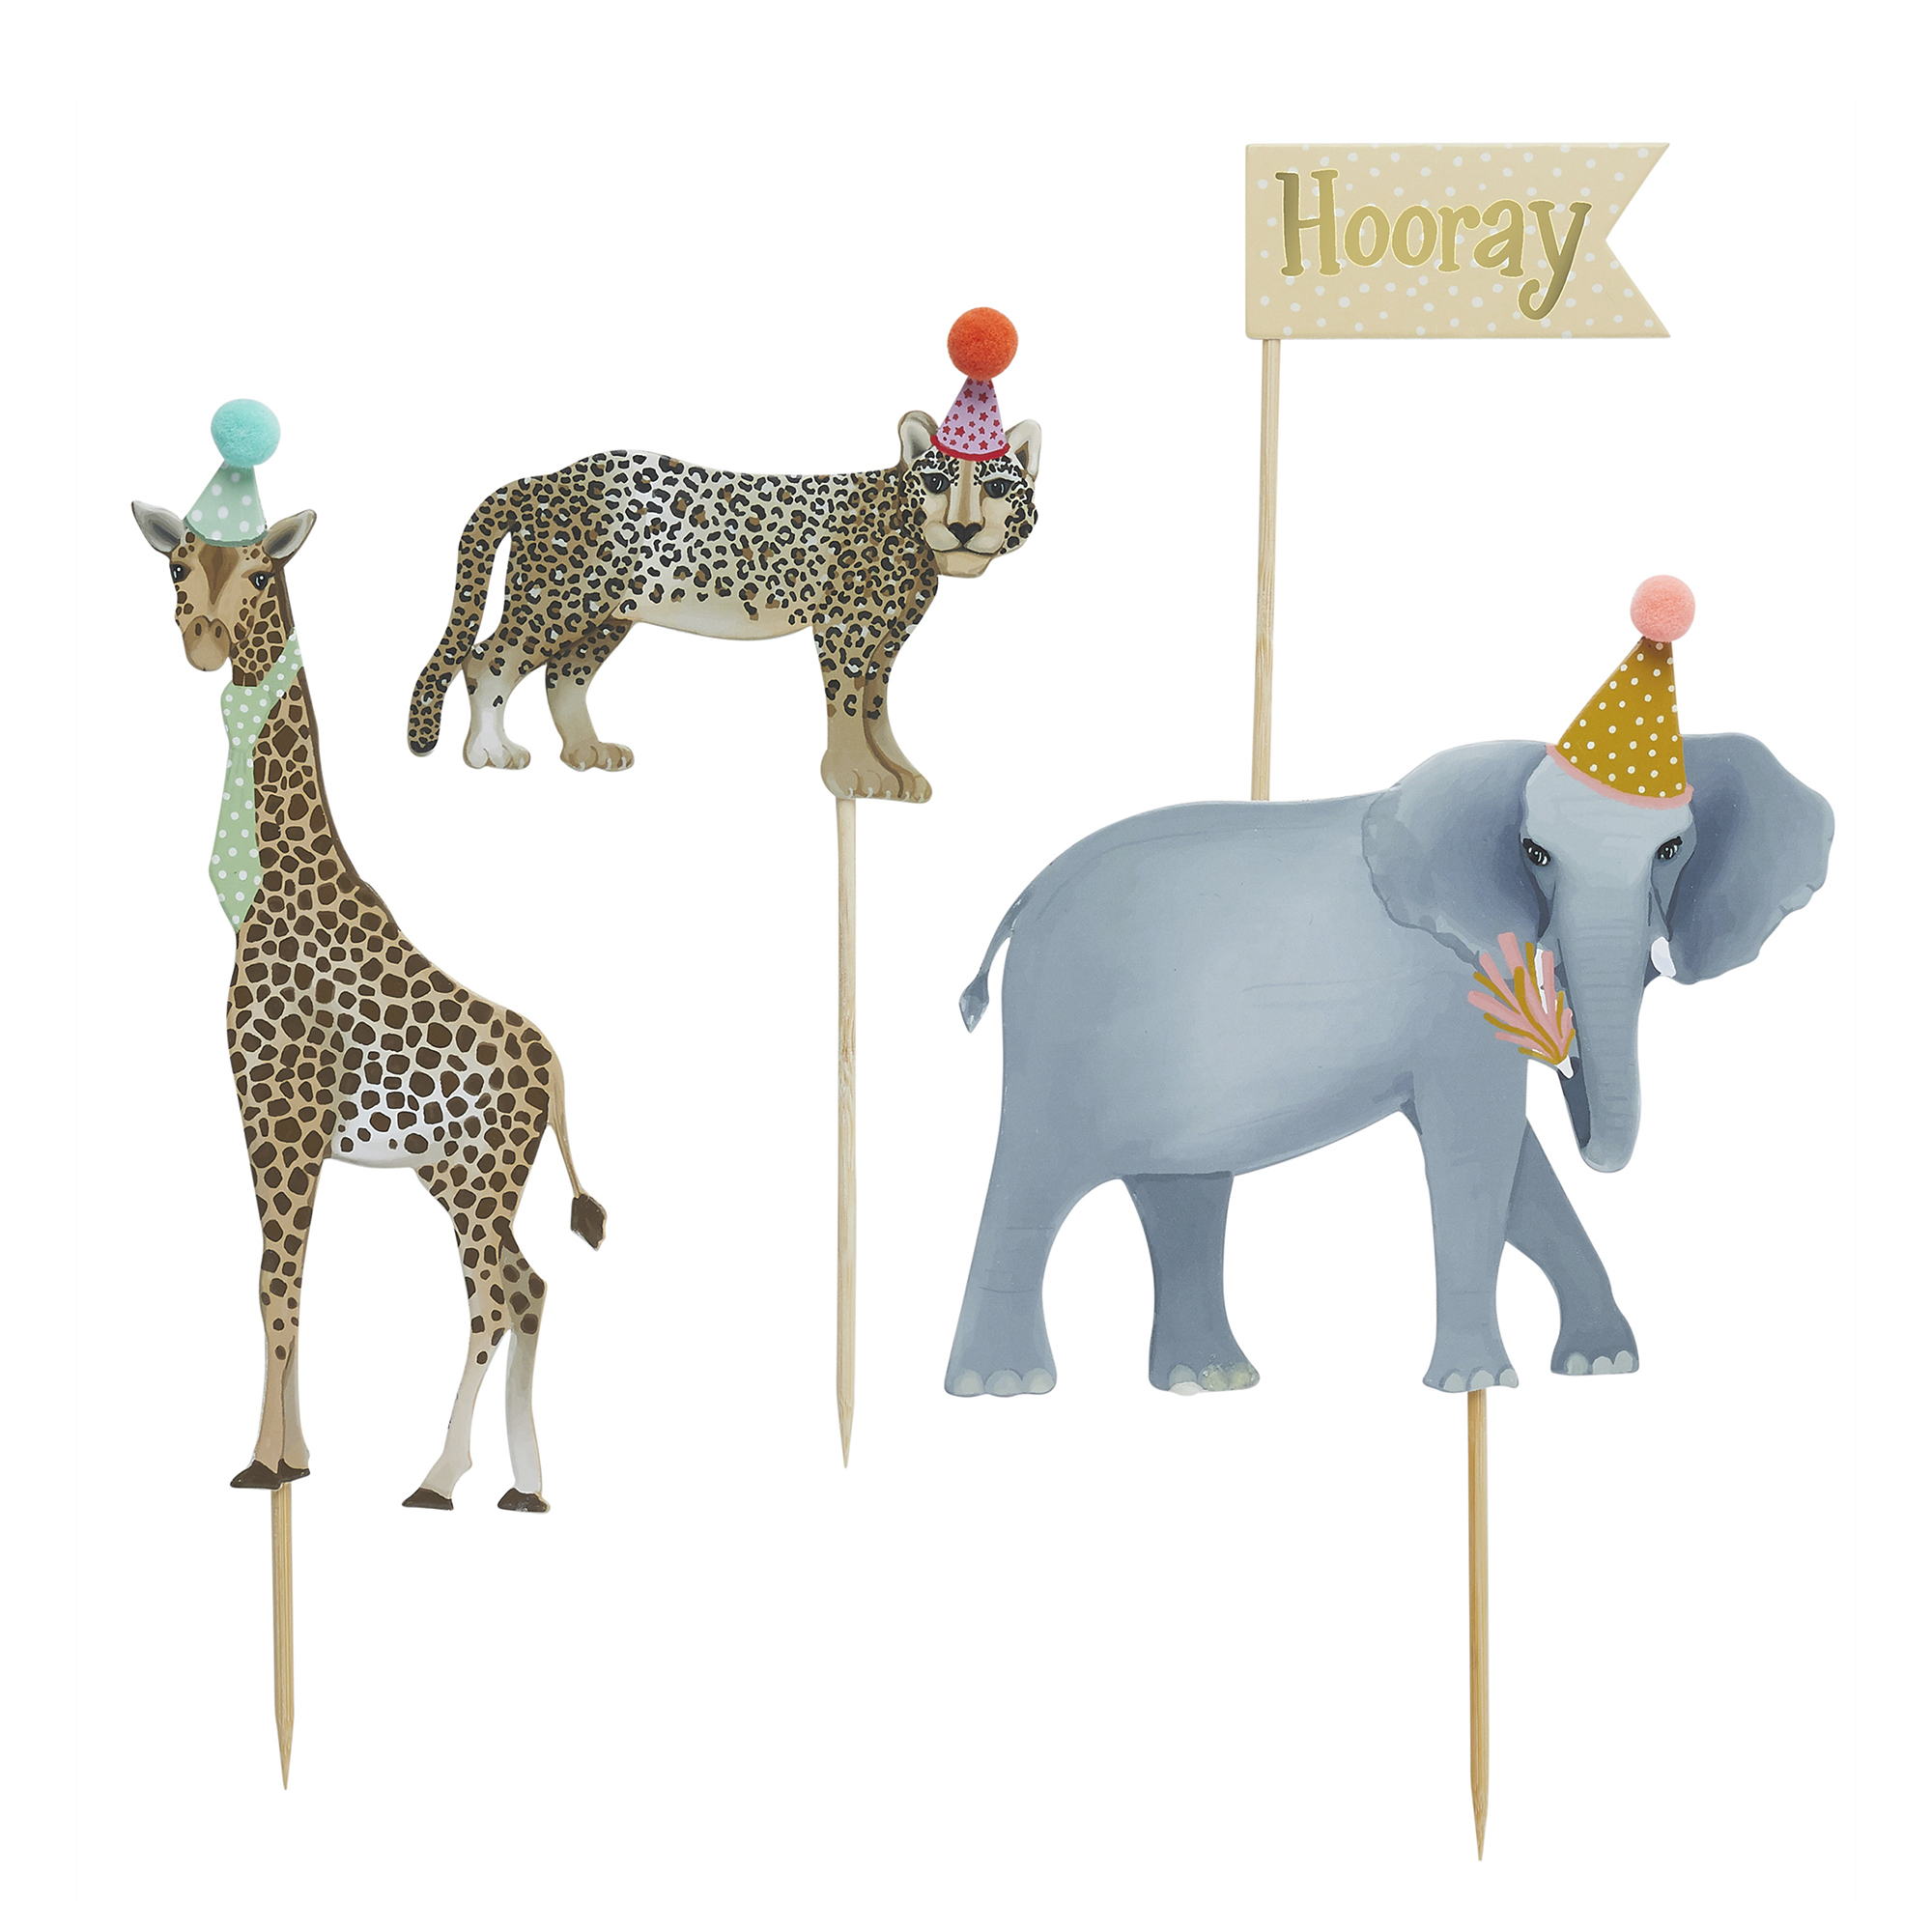 Party Animals Birthday Tableware & Decorations Bundle -10 Guests